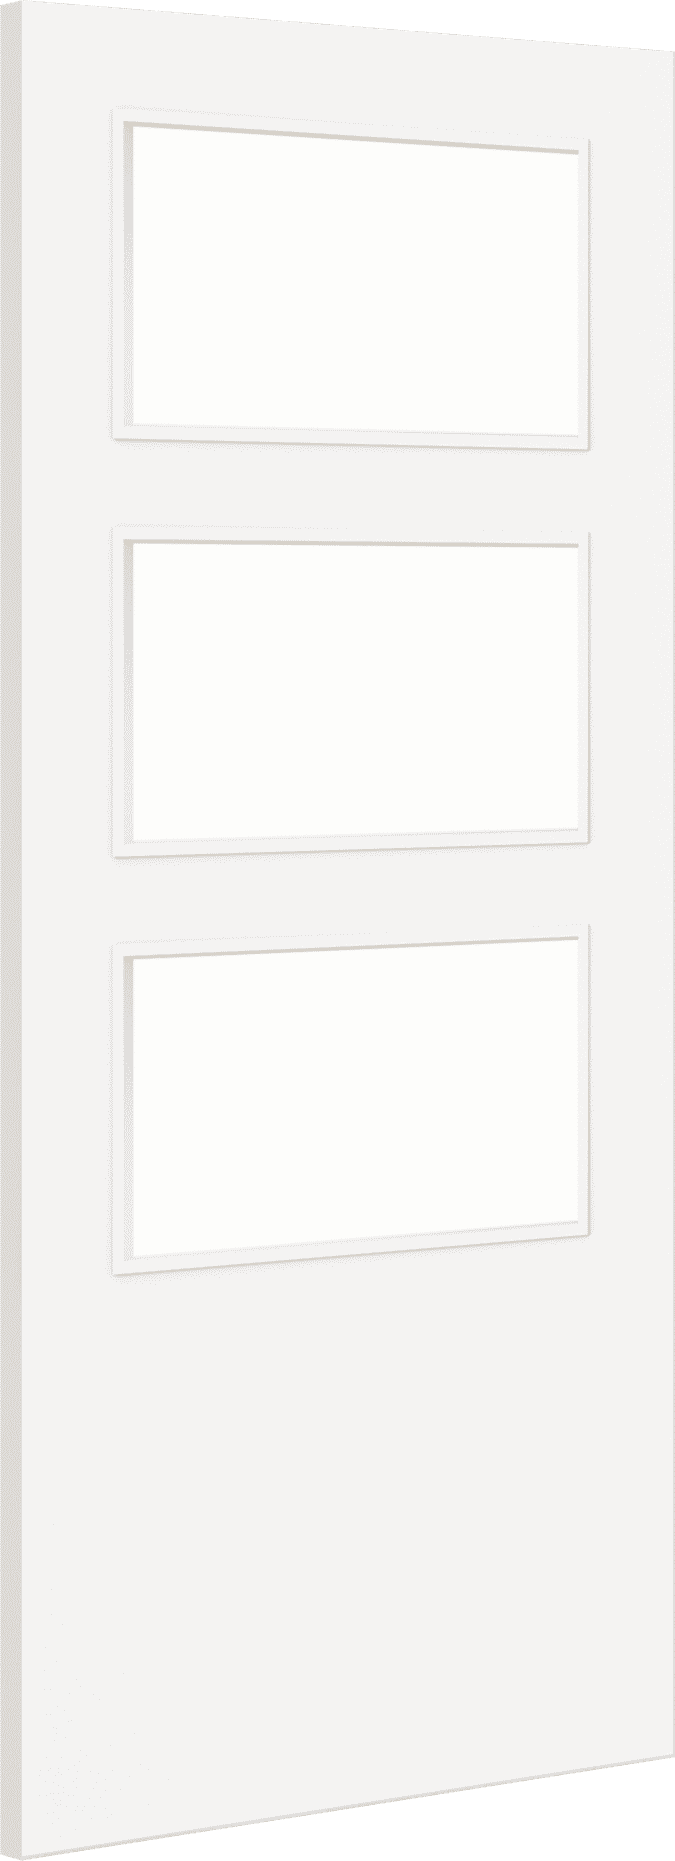 2040mm x 926mm x 44mm Architectural Paint Grade White 03 Frosted Glazed Fire Door Blank